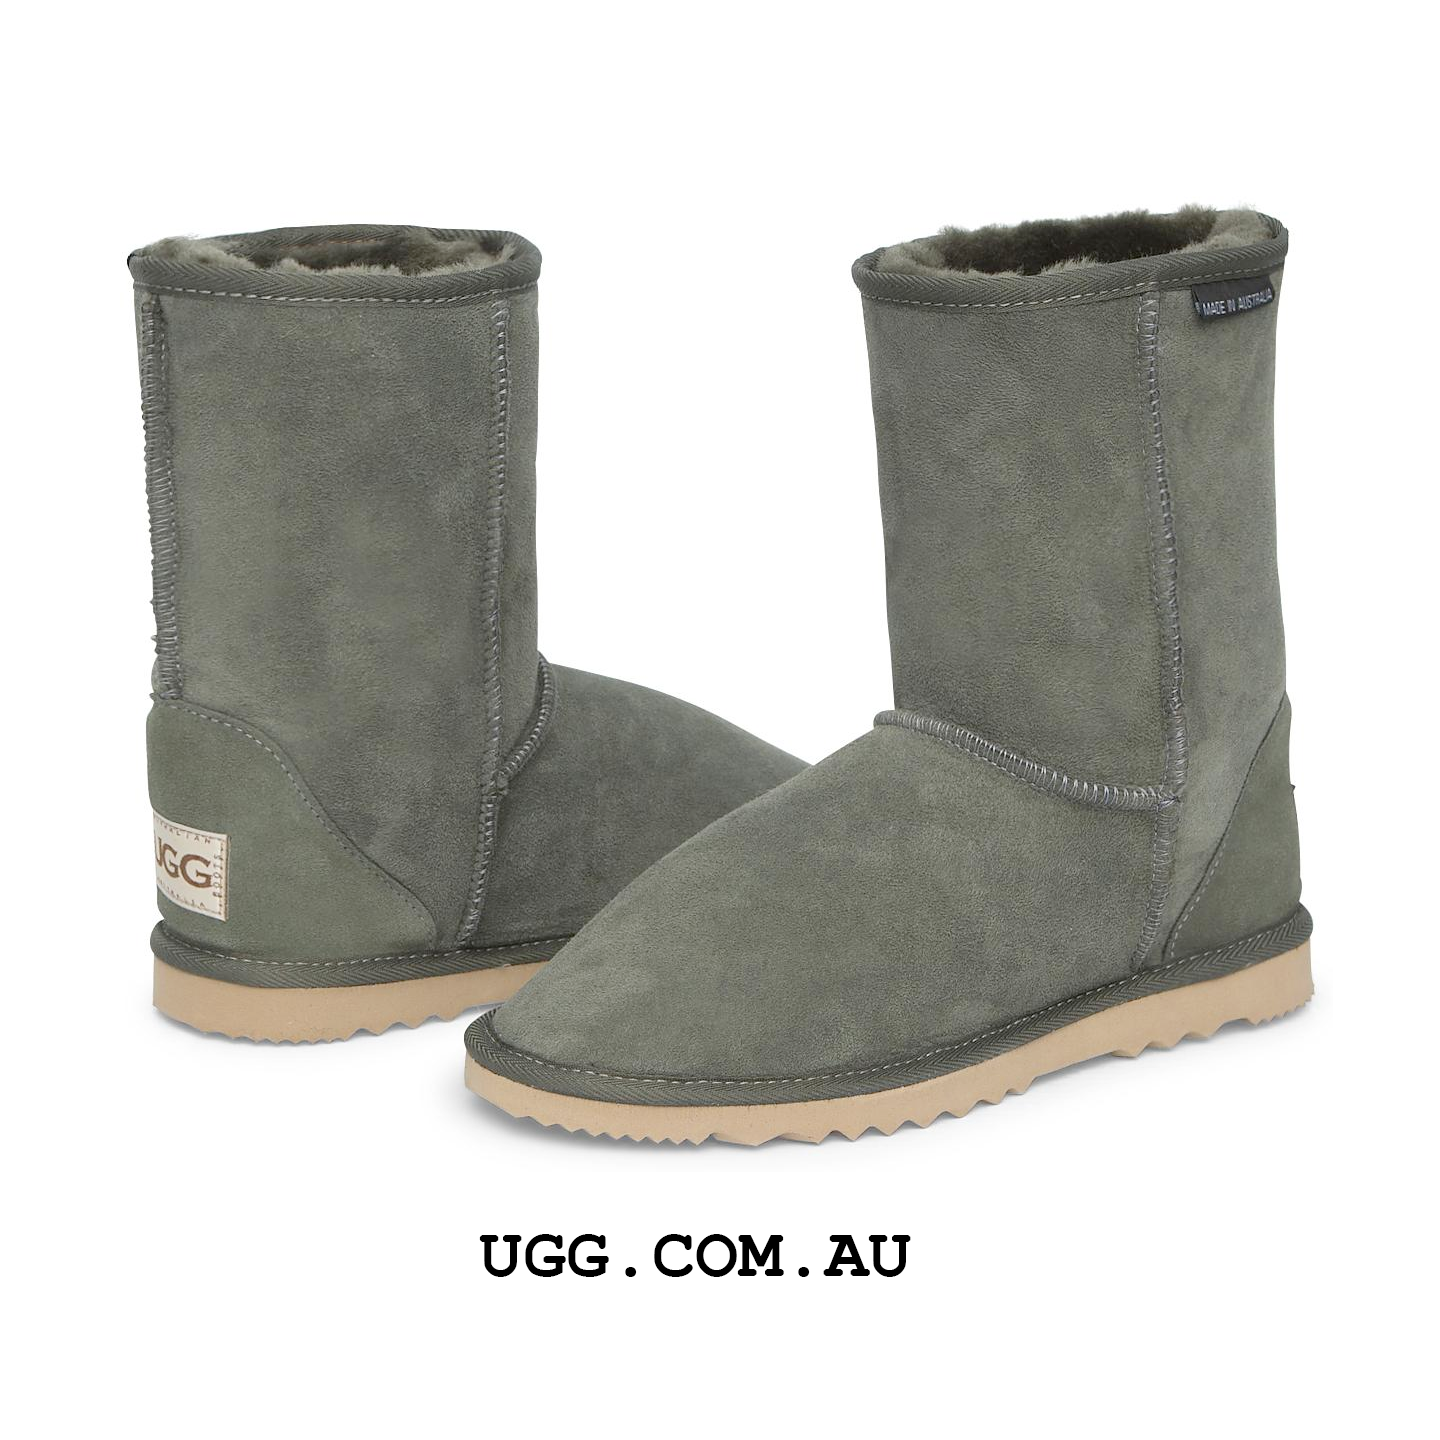 Deluxe Classic Short UGG Boots